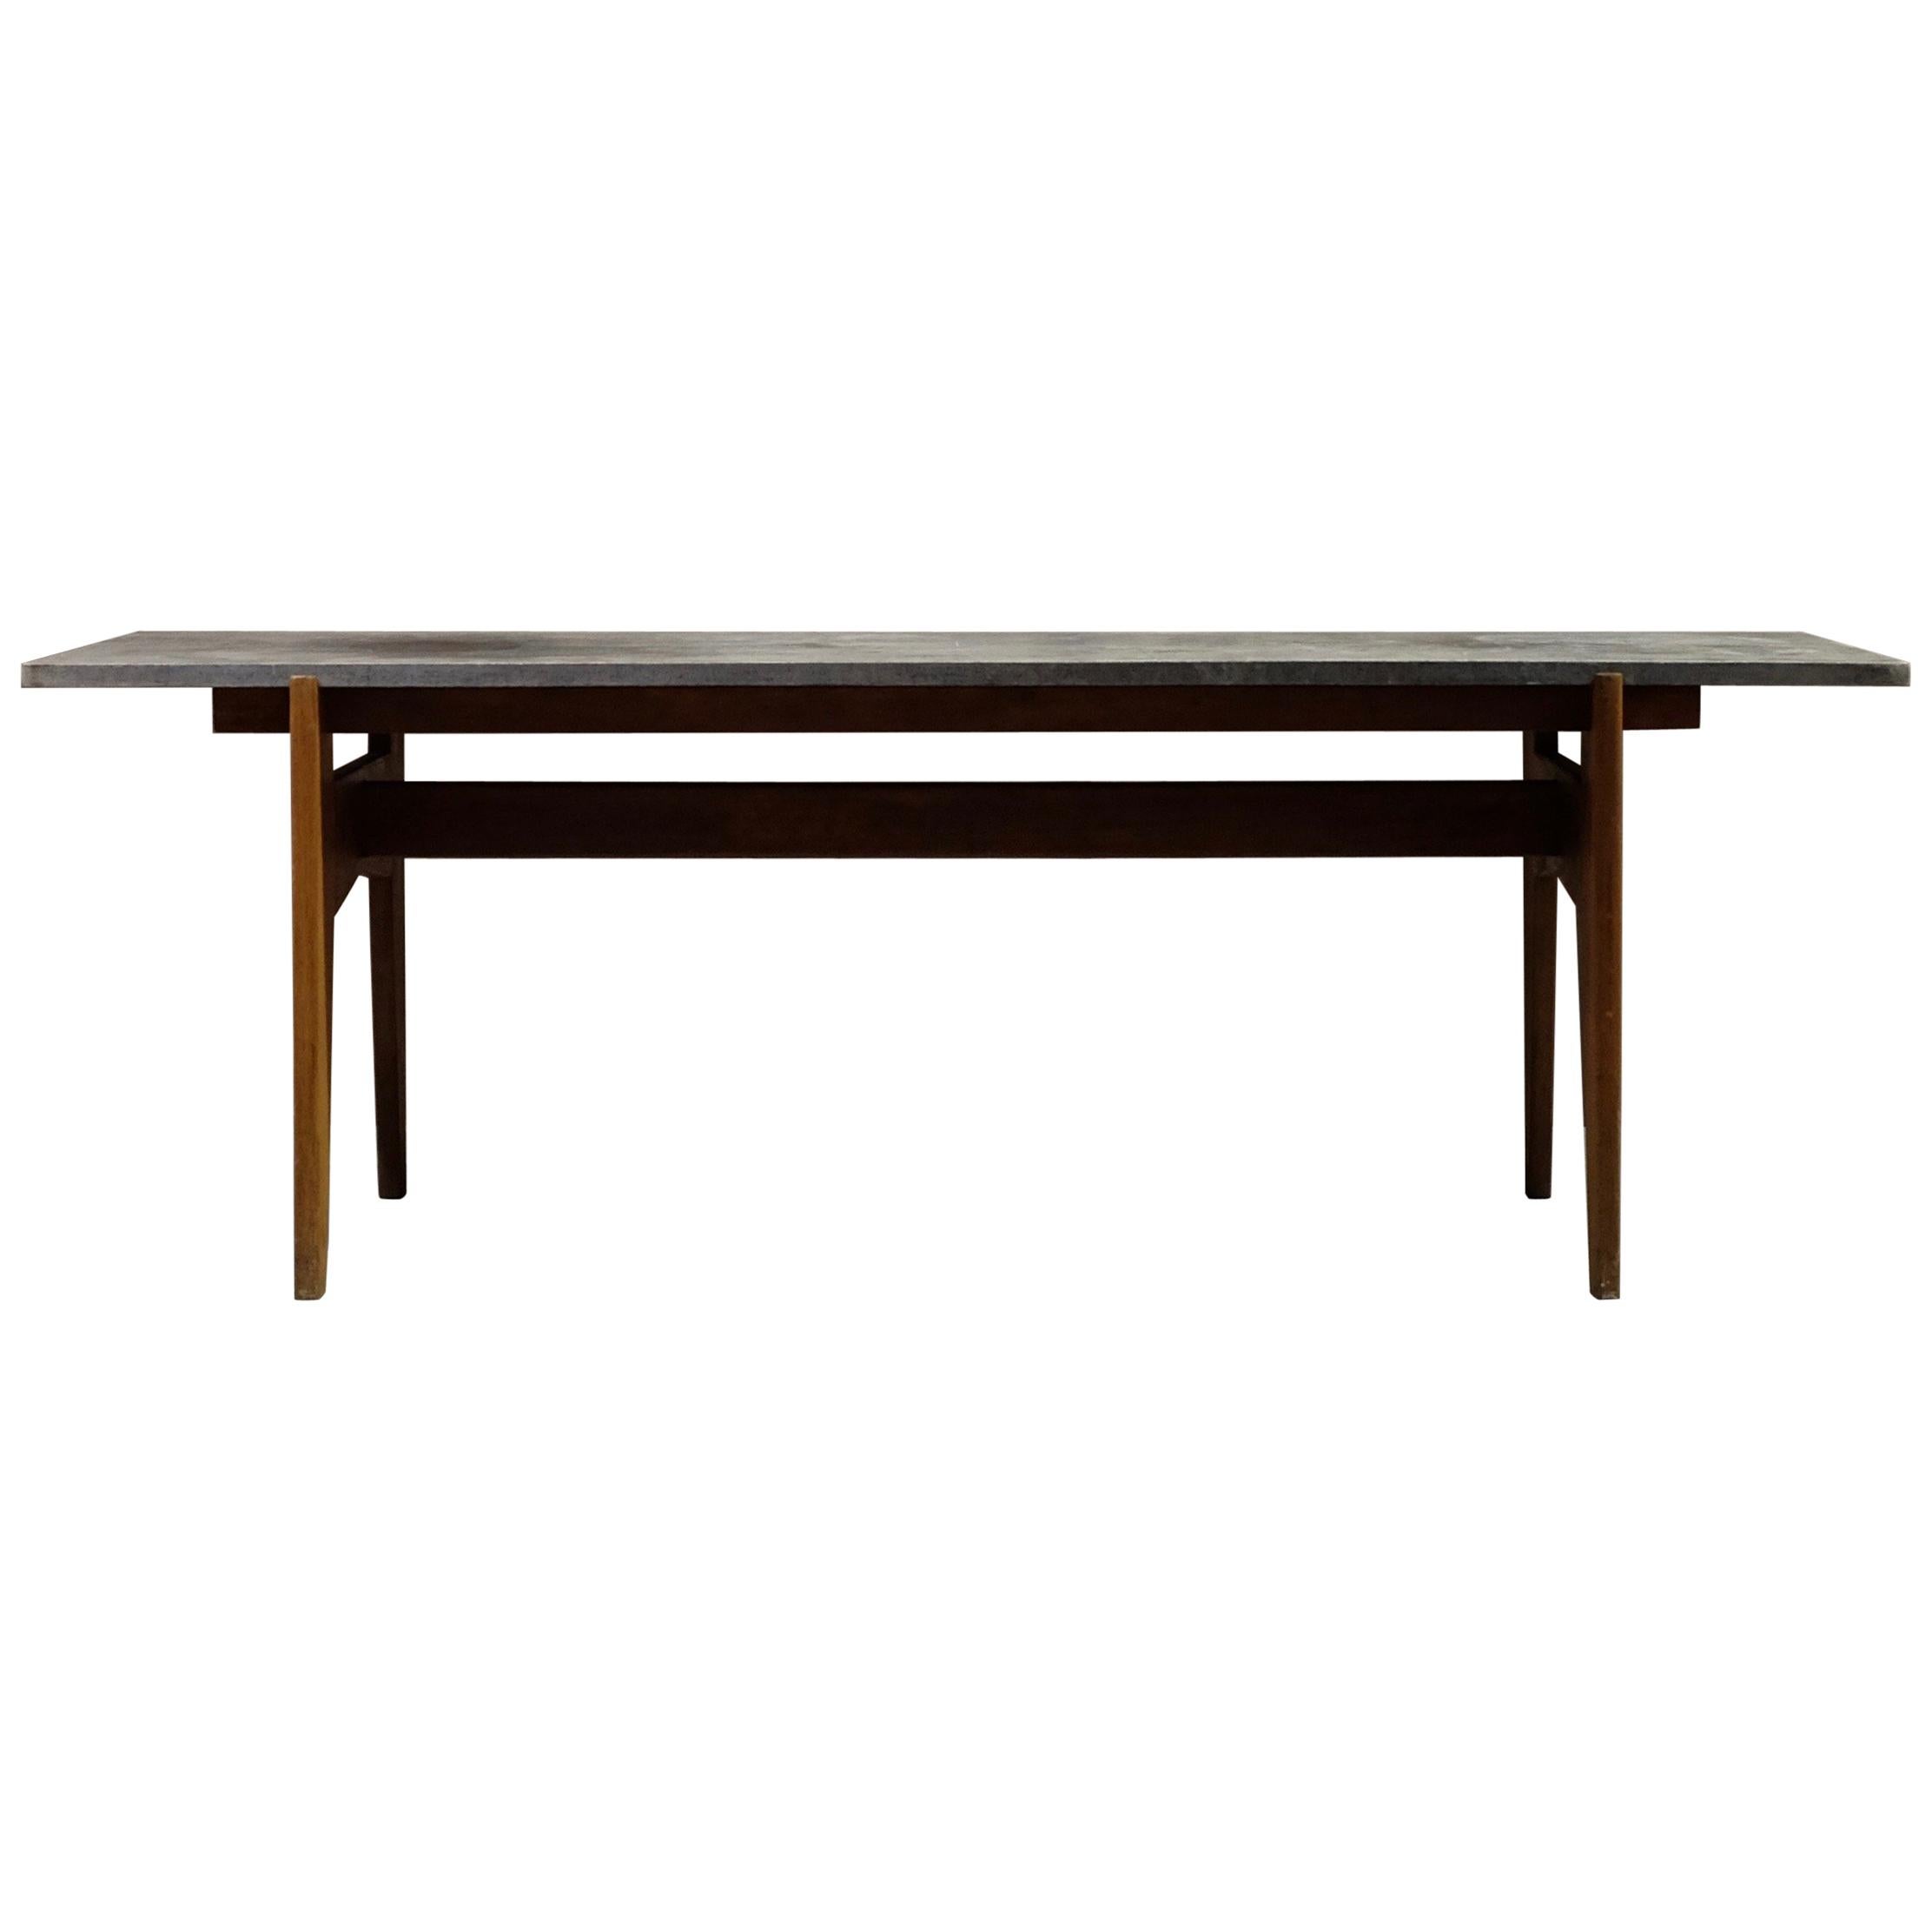 Teak and Limestone Coffee Table by Hans-Agne Jakobsson, 1950s